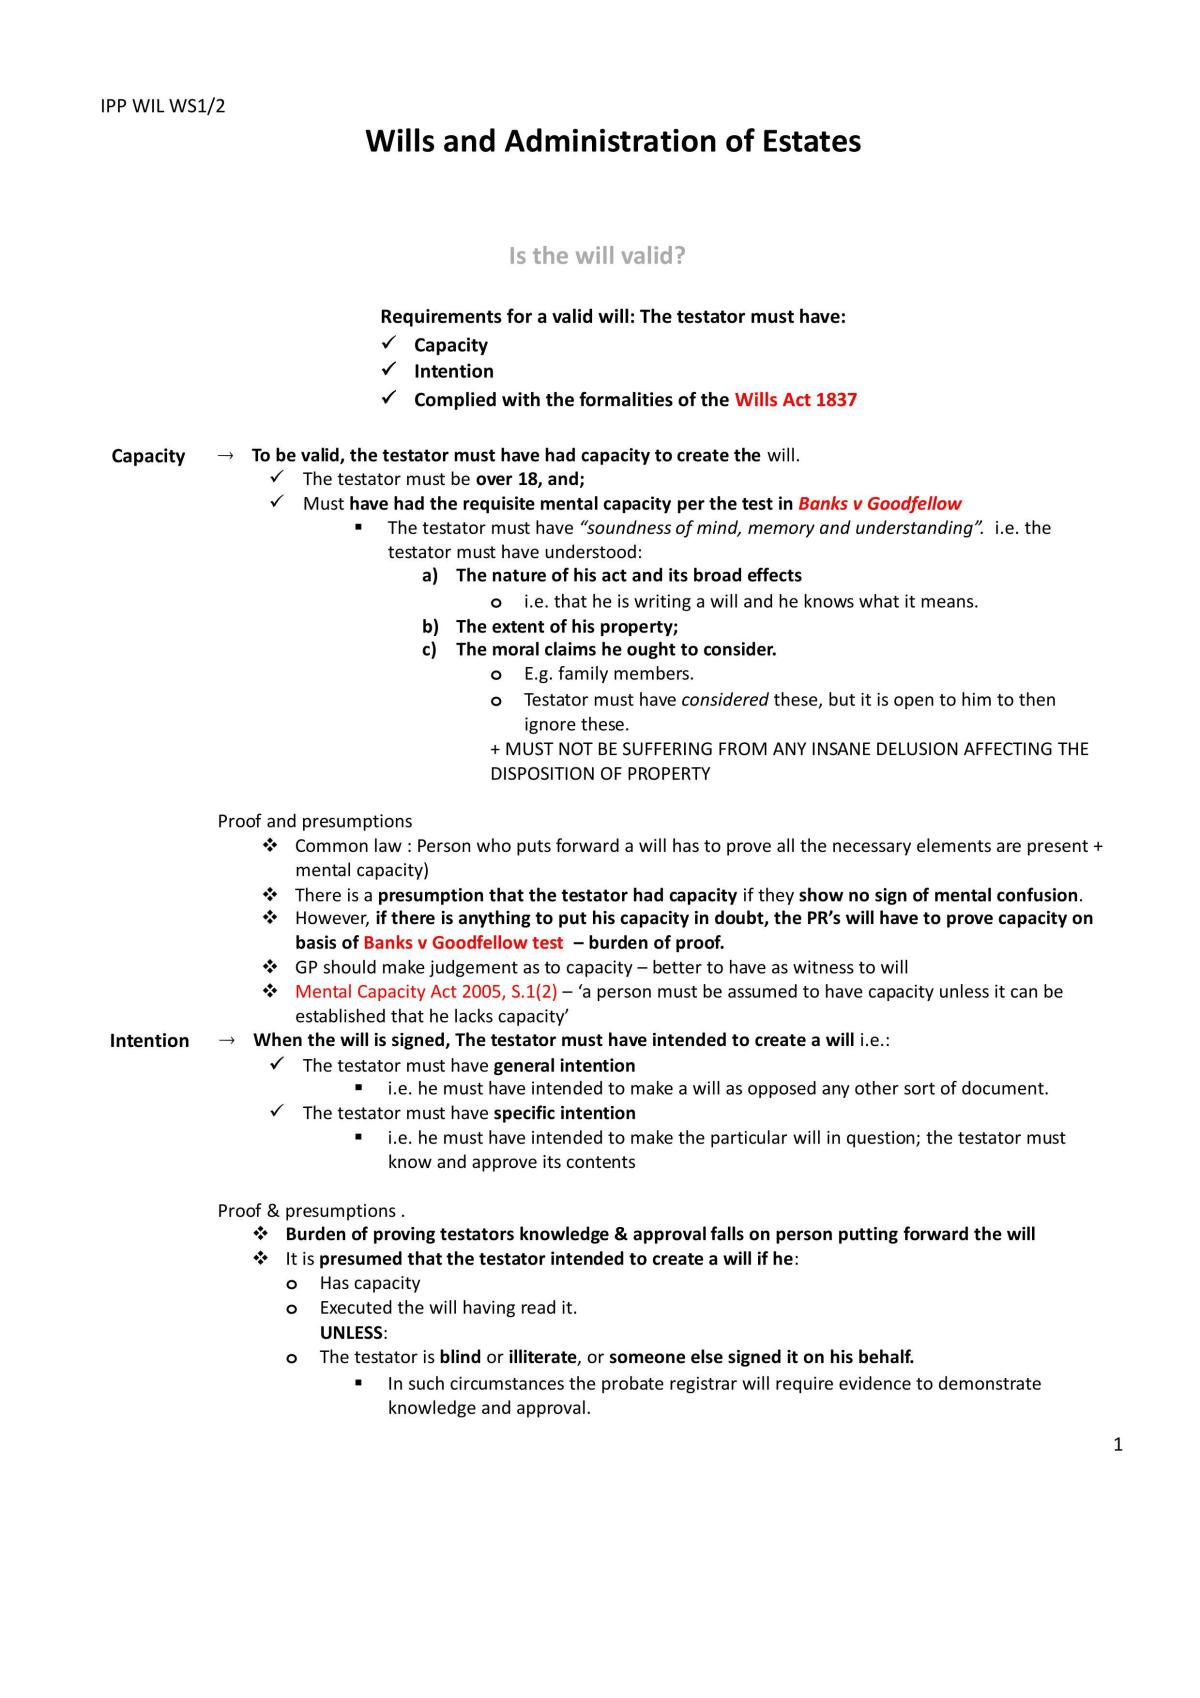 Wills and Administration of Estates Notes - Page 1